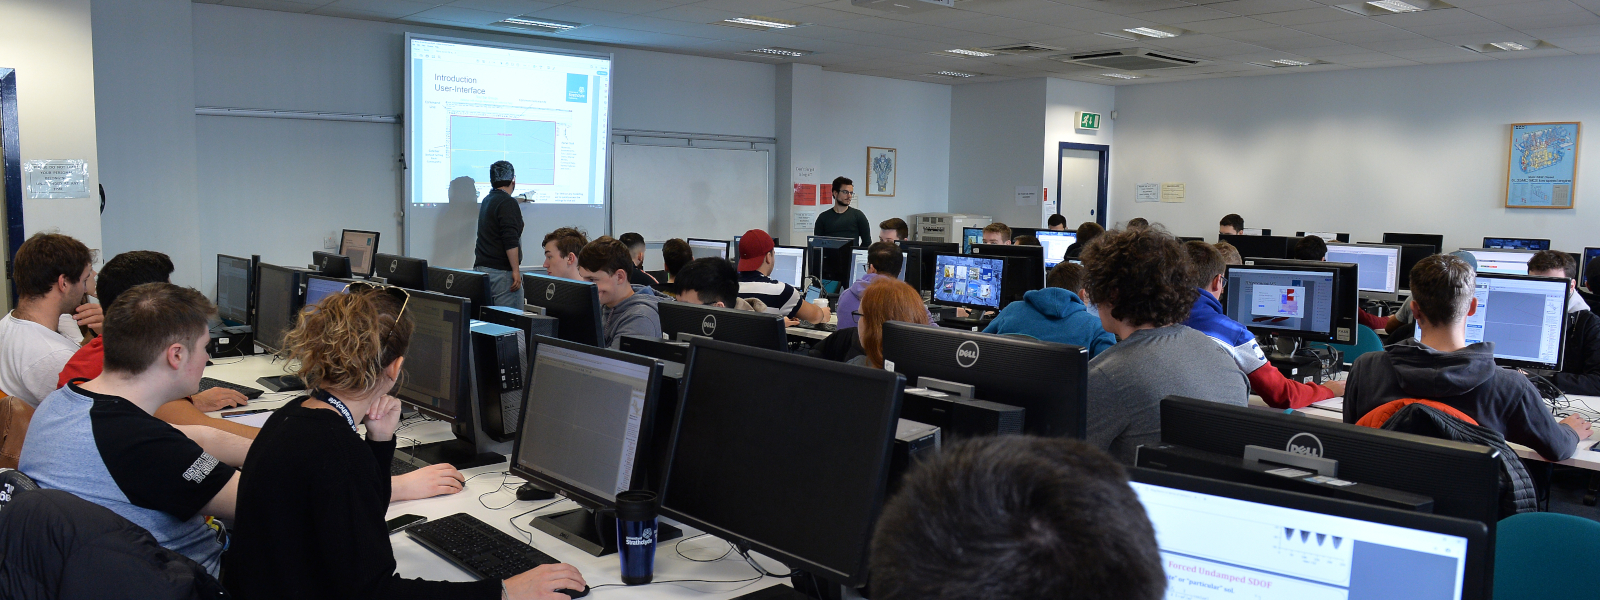 Students within a computer lab